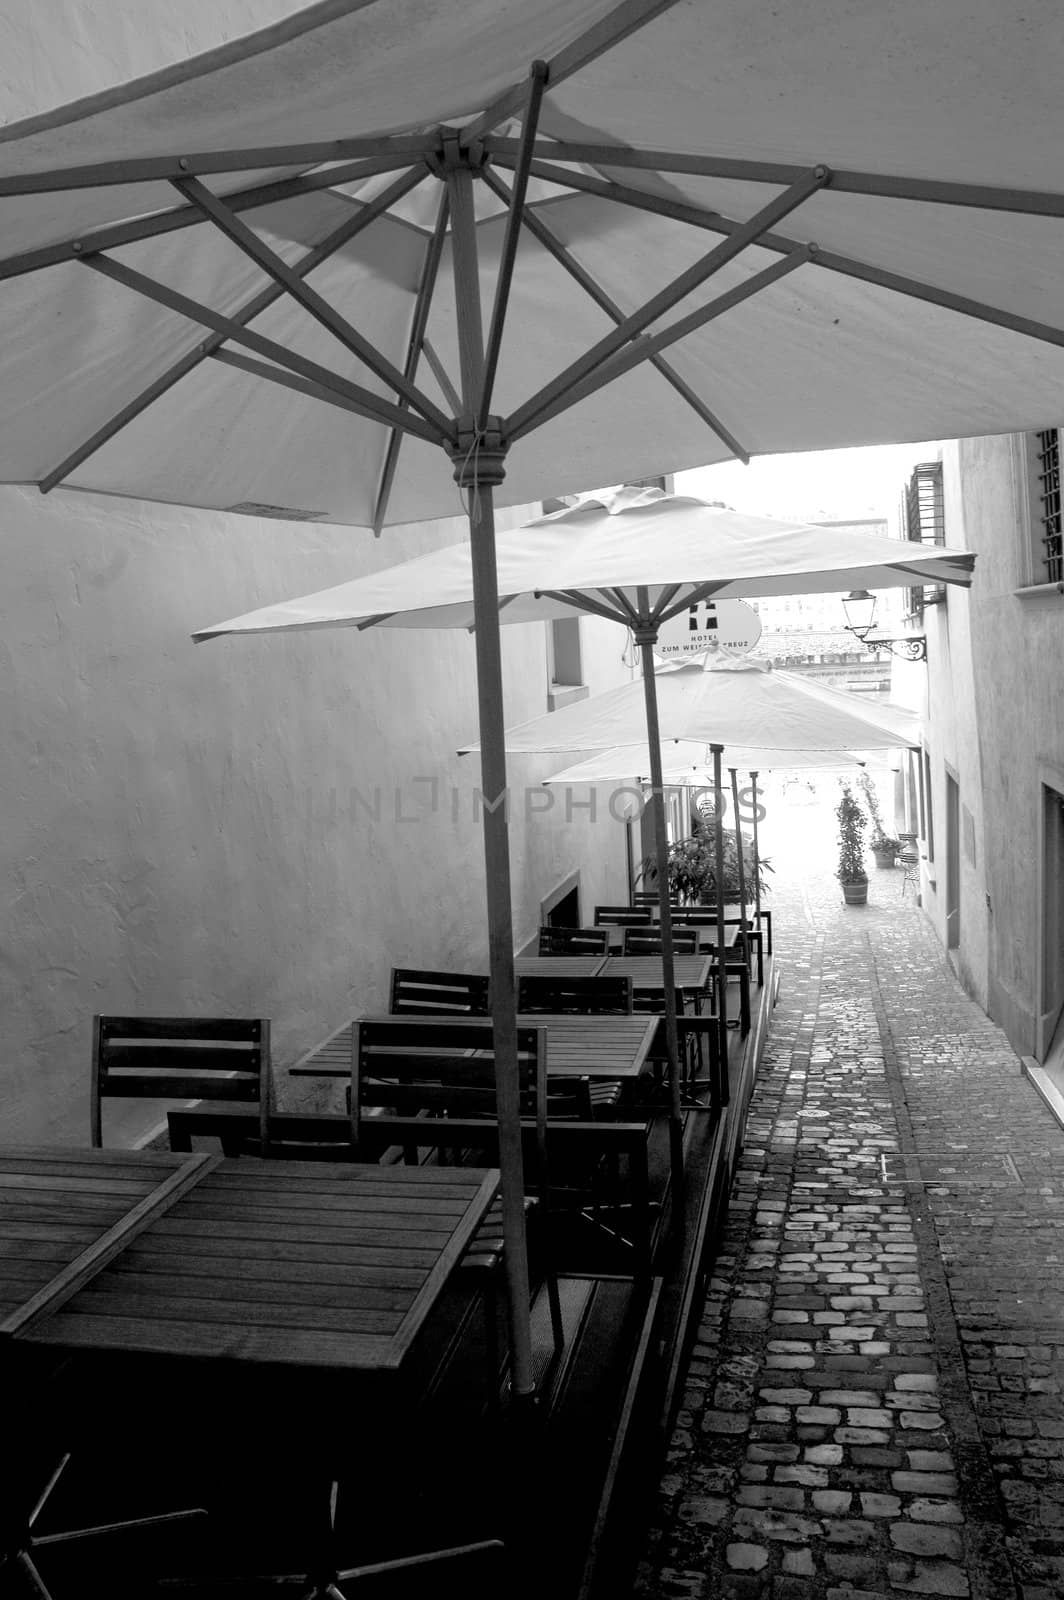 Classic Swiss alley with tables and chairs.